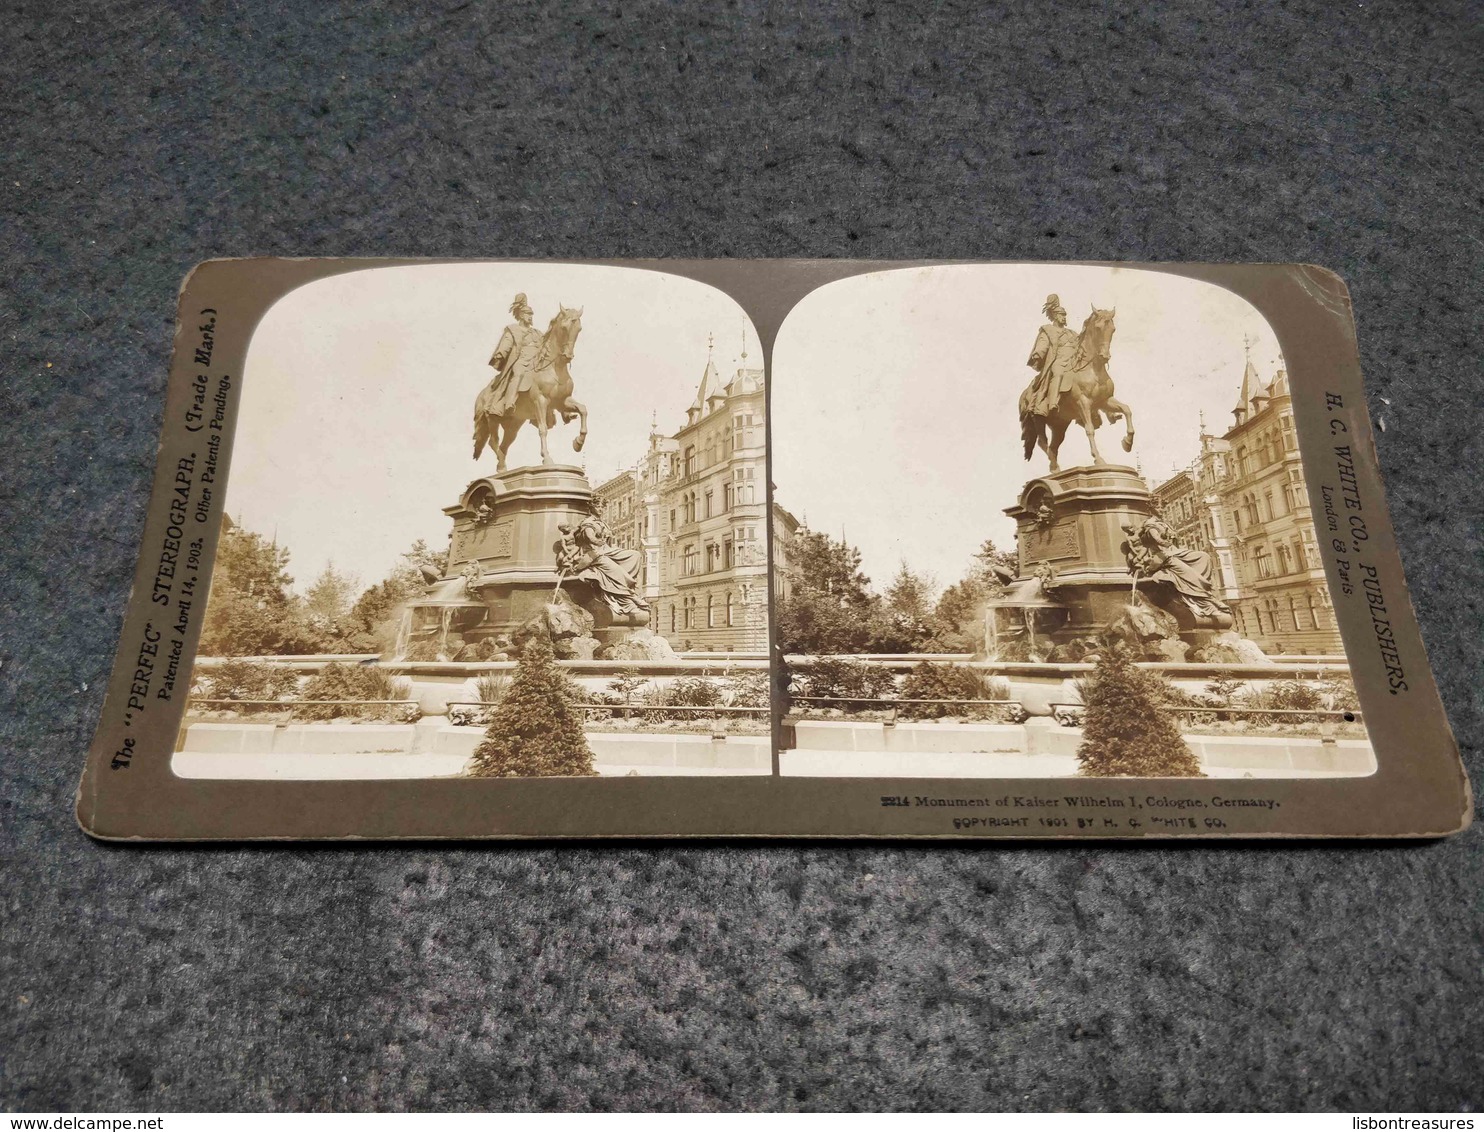 ANTIQUE STEREOSCOPIC REAL PHOTO GERMANY - MONUMENT OF KAISER WILHEIM I - COLOGNE Nº 2214 - Visionneuses Stéréoscopiques